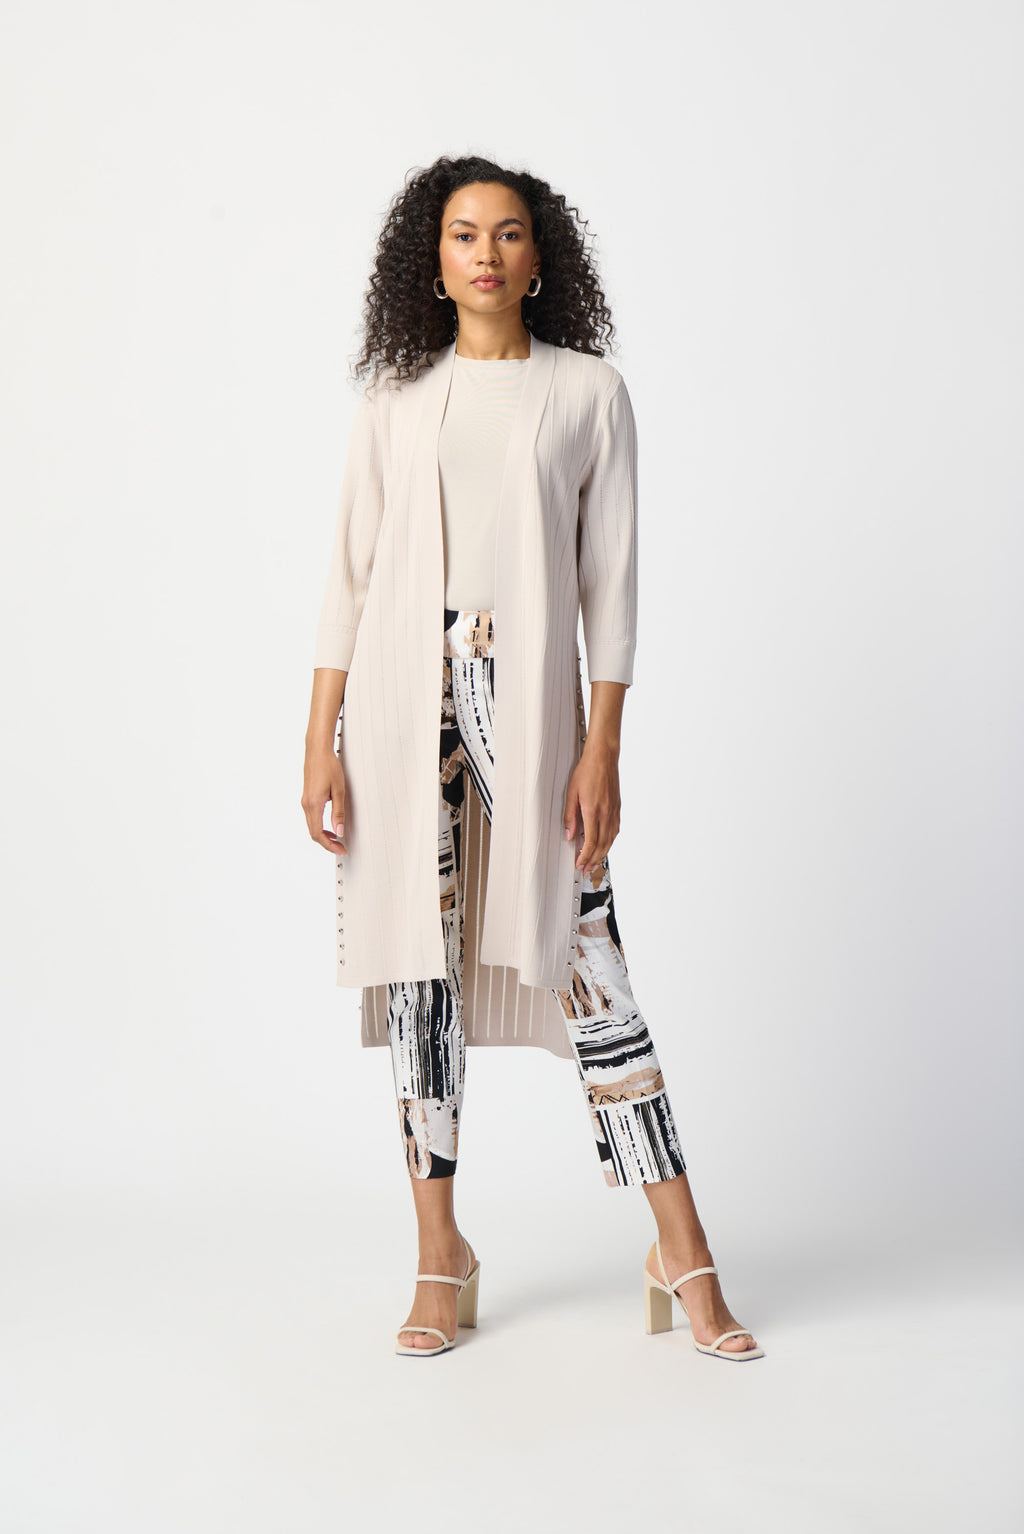 Choose an expressive look with this lightweight light beige textured cover-up/cardigan that has long side slits and bell sleeves to create movement and flow as you walk. The stud detailing along the slits gives it an edgy yet classy look for work or leisure.